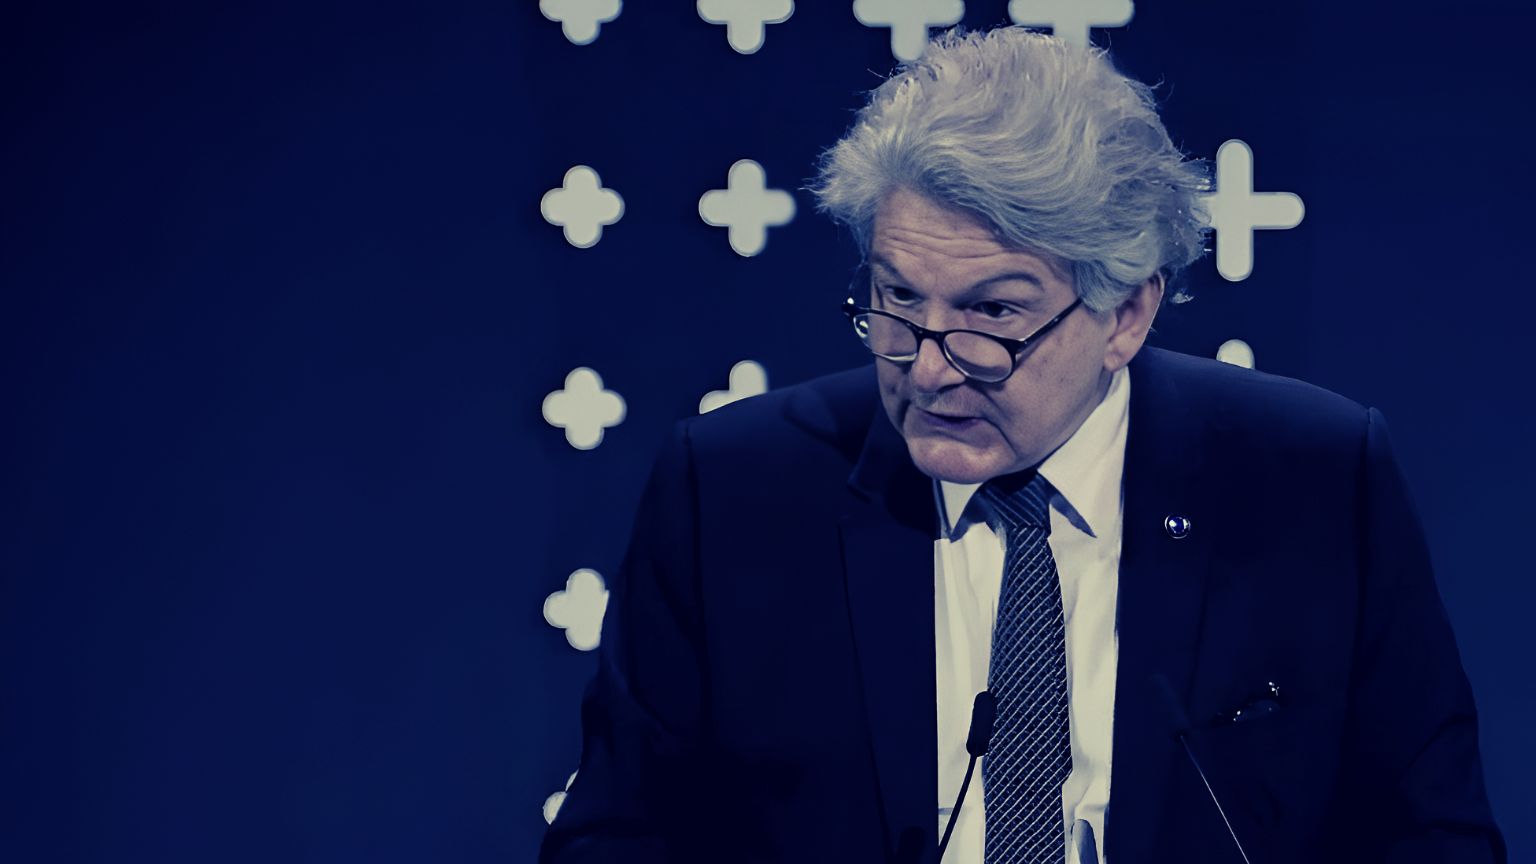 Rights Groups Push Back Against EU Censorship Chief Thierry Breton After He Pressured Platforms to Censor “Disinformation”